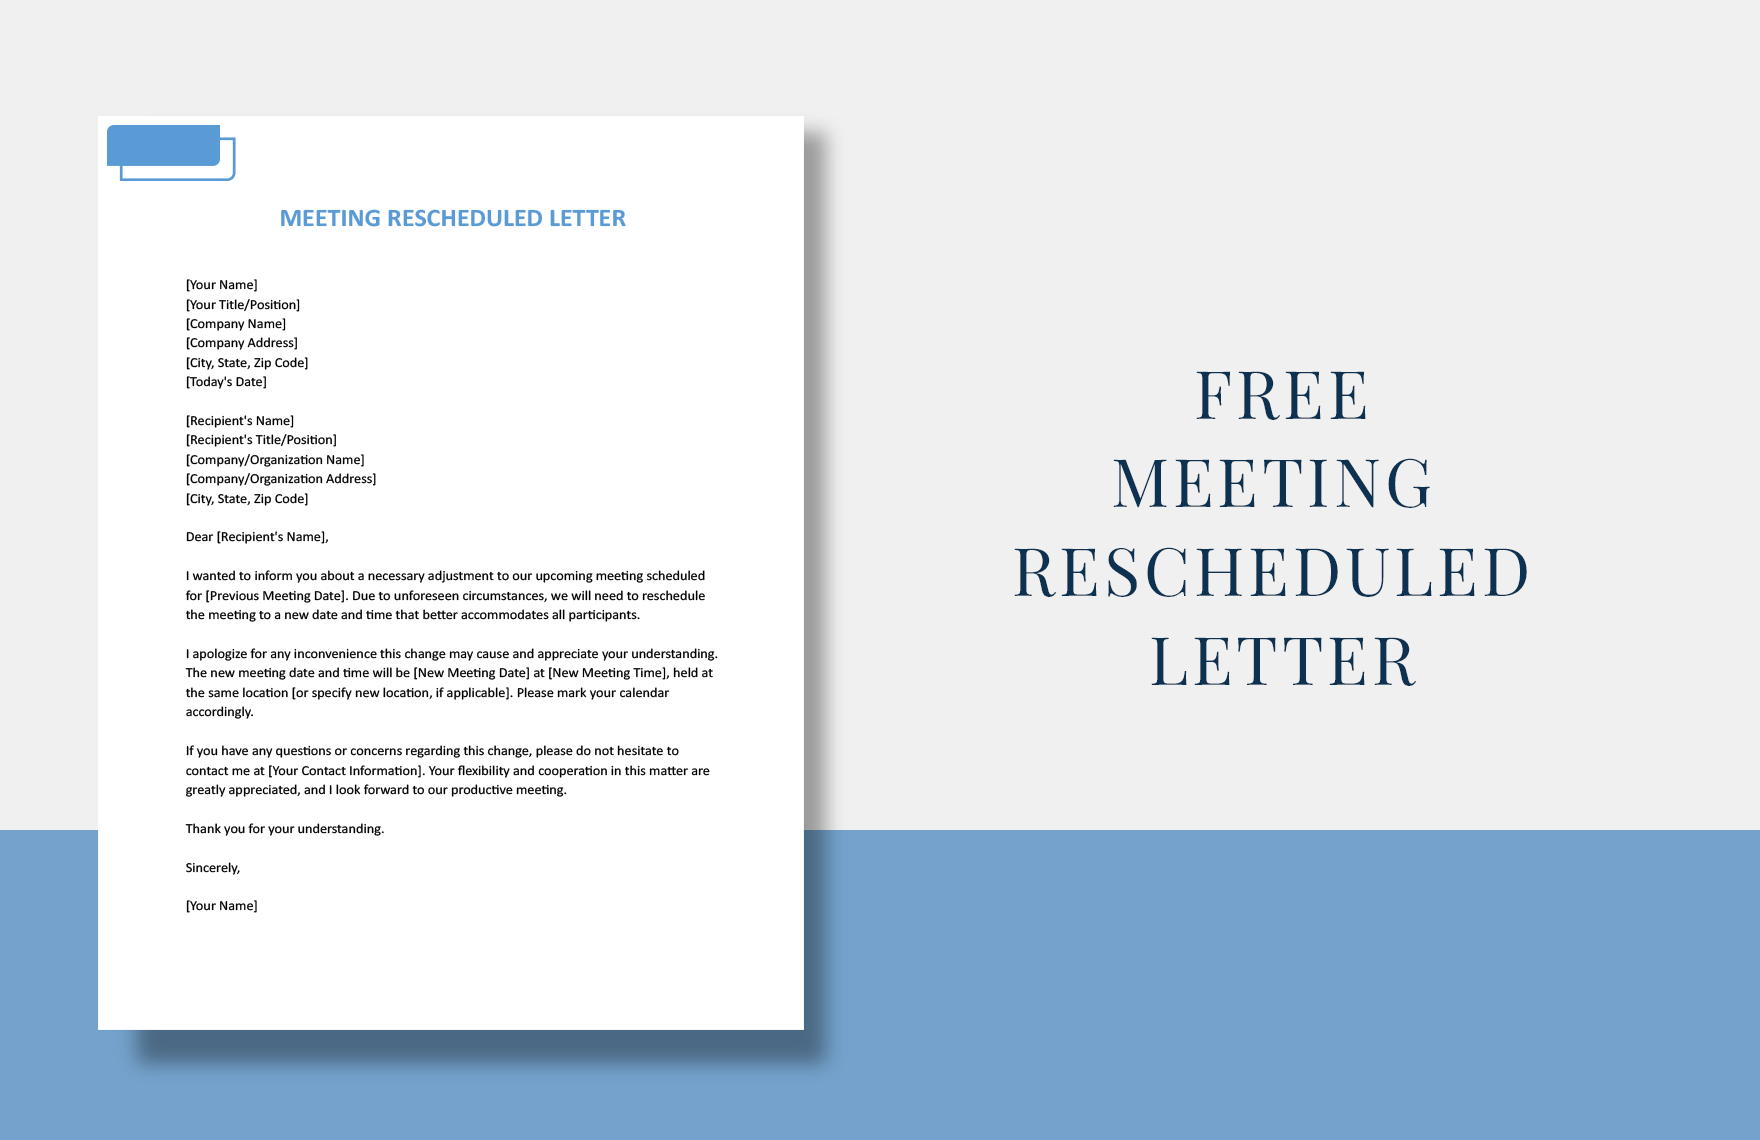 Free Meeting Rescheduled Letter